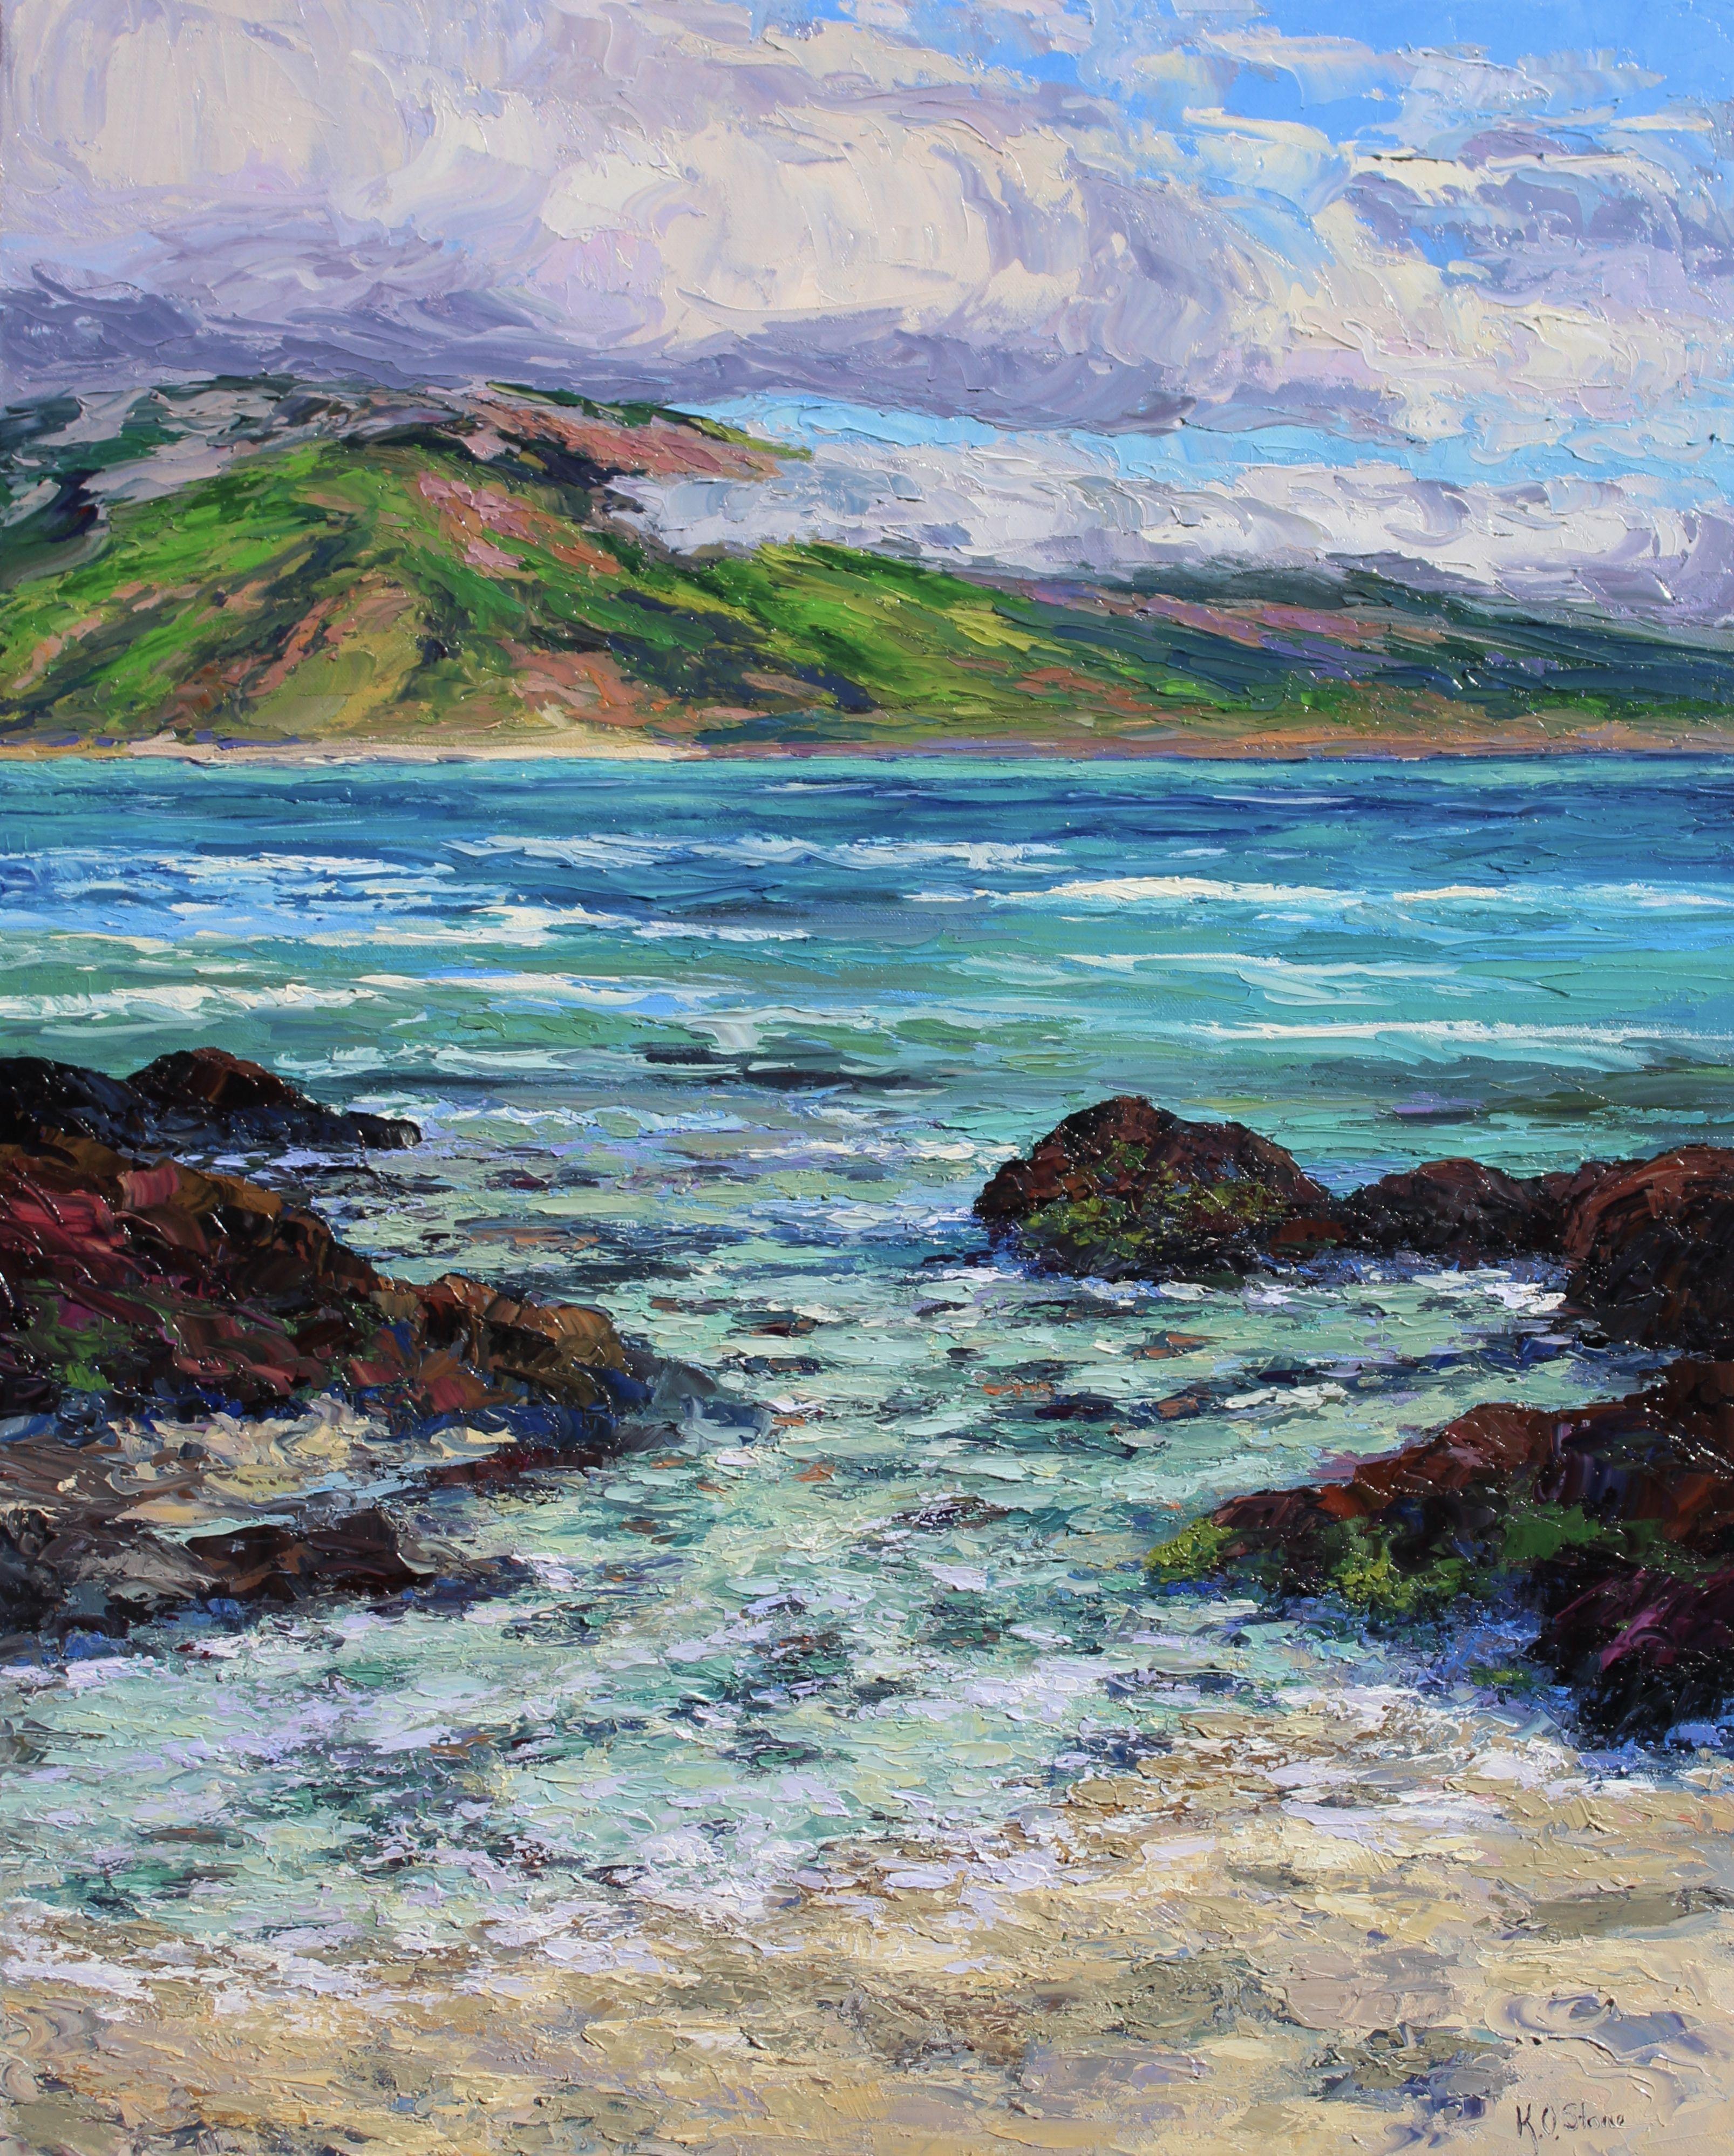 An original palette knife seascape oil painting of Sugar Cove on Maui with a view towards the island of Kahoolawe. Lava sea rocks frame the view of this ocean cove with numerous shades of blue, green and violet. Island clouds drift over the island